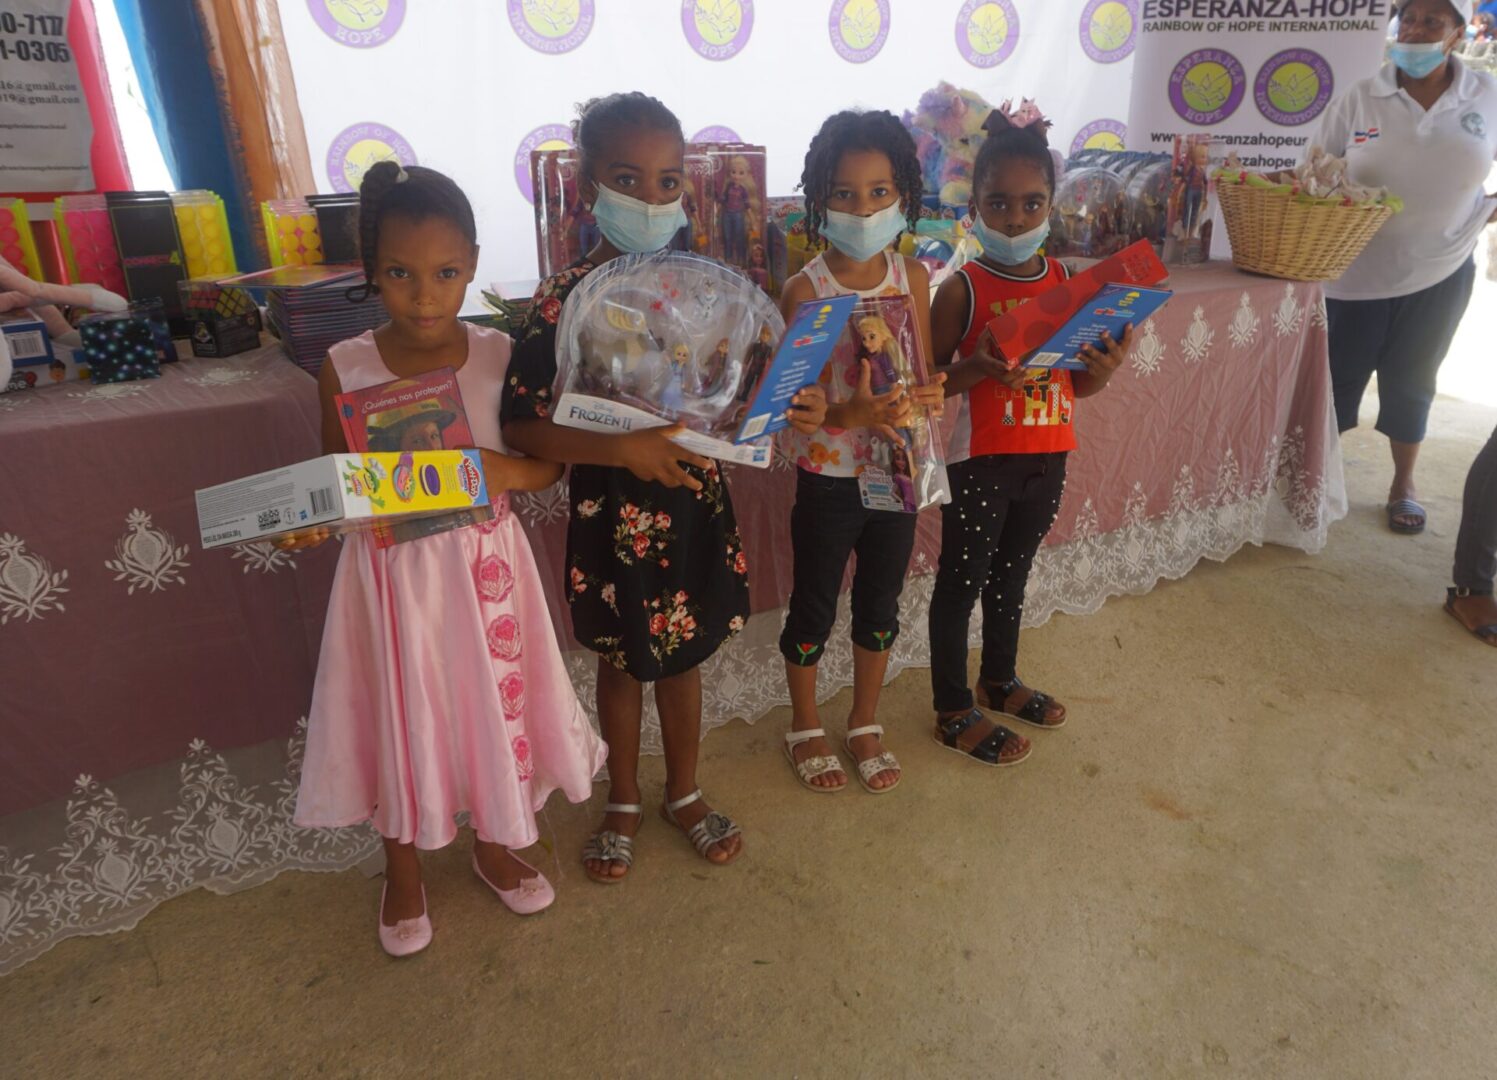 Four young girls wearing masks and holding books and toys, batch 5